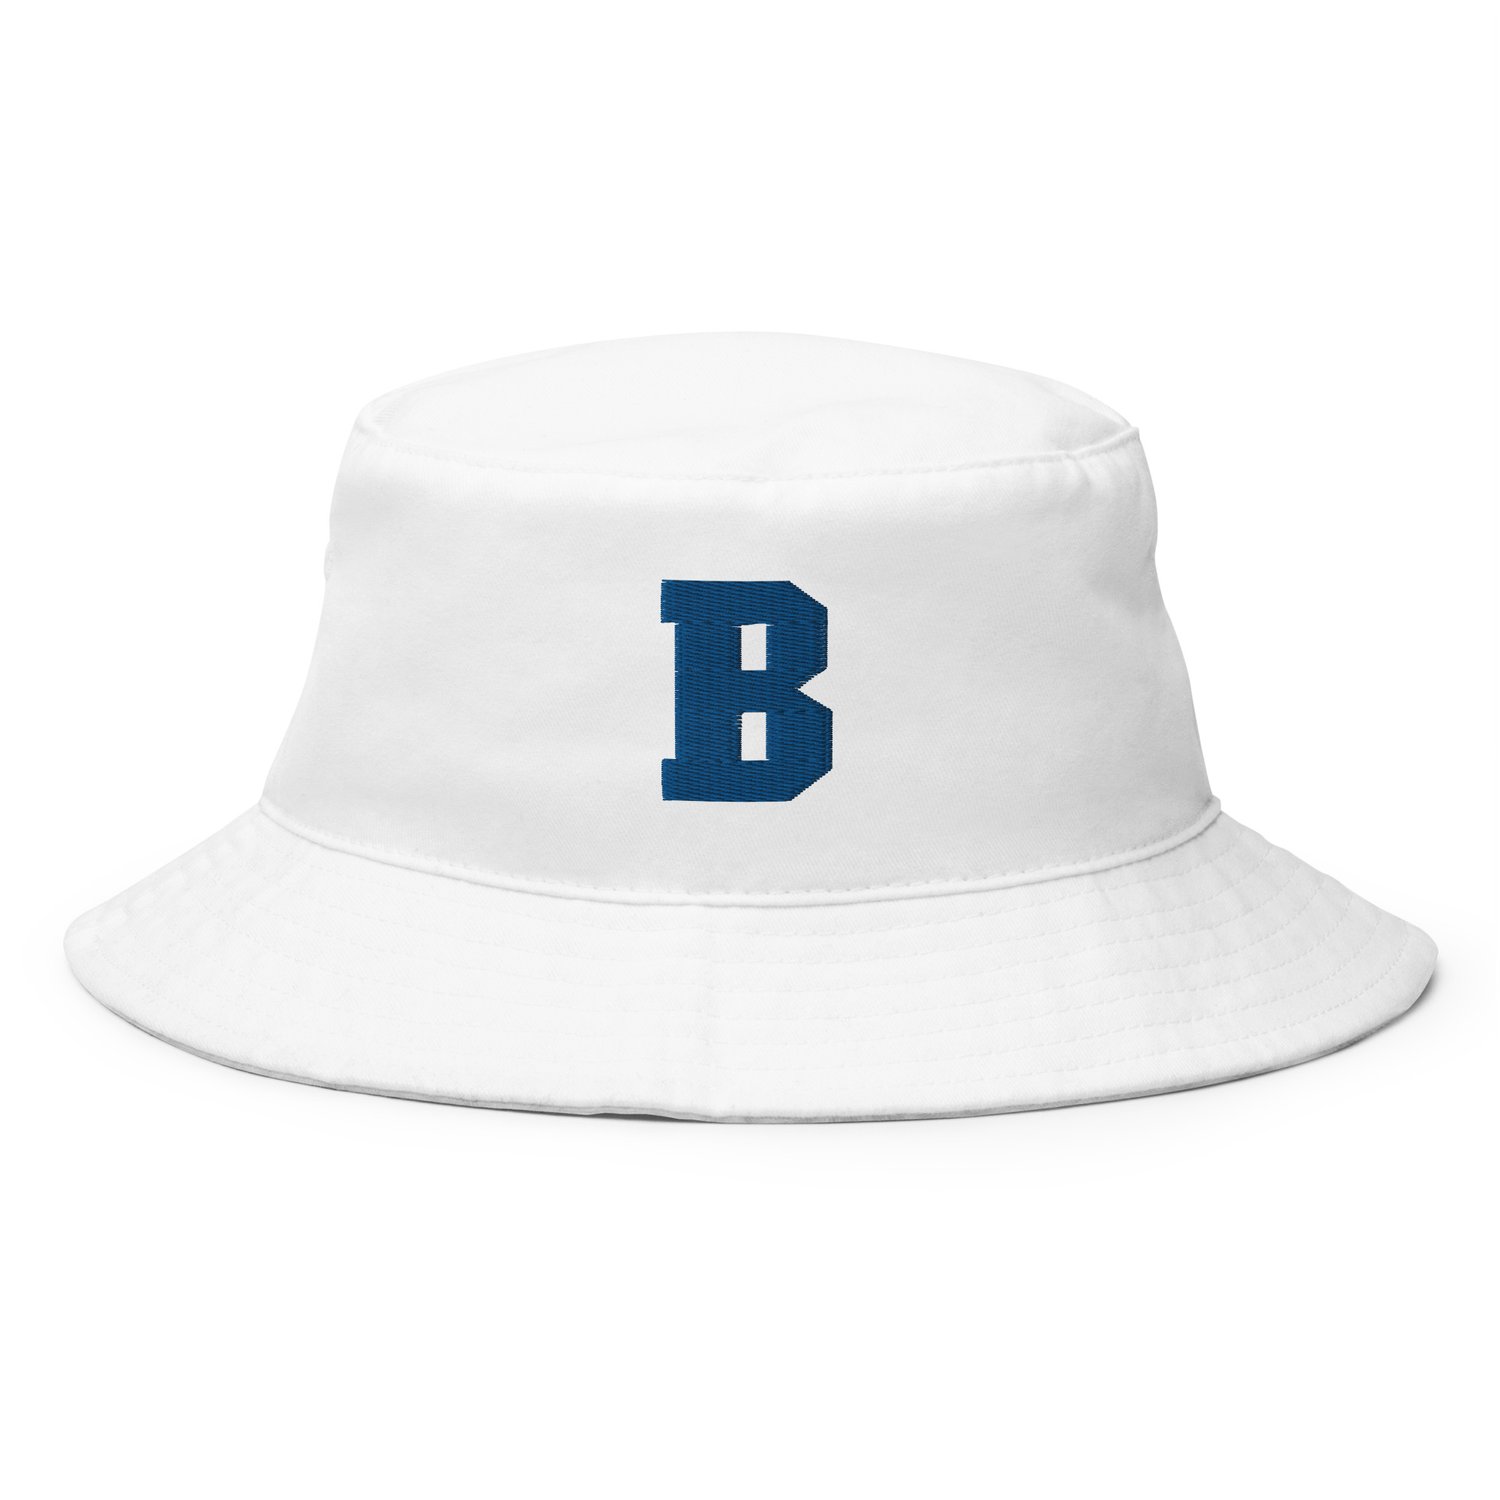 B is for Bucket ASSOCIATION (Embroidered) ROCKETS — BAY Hat